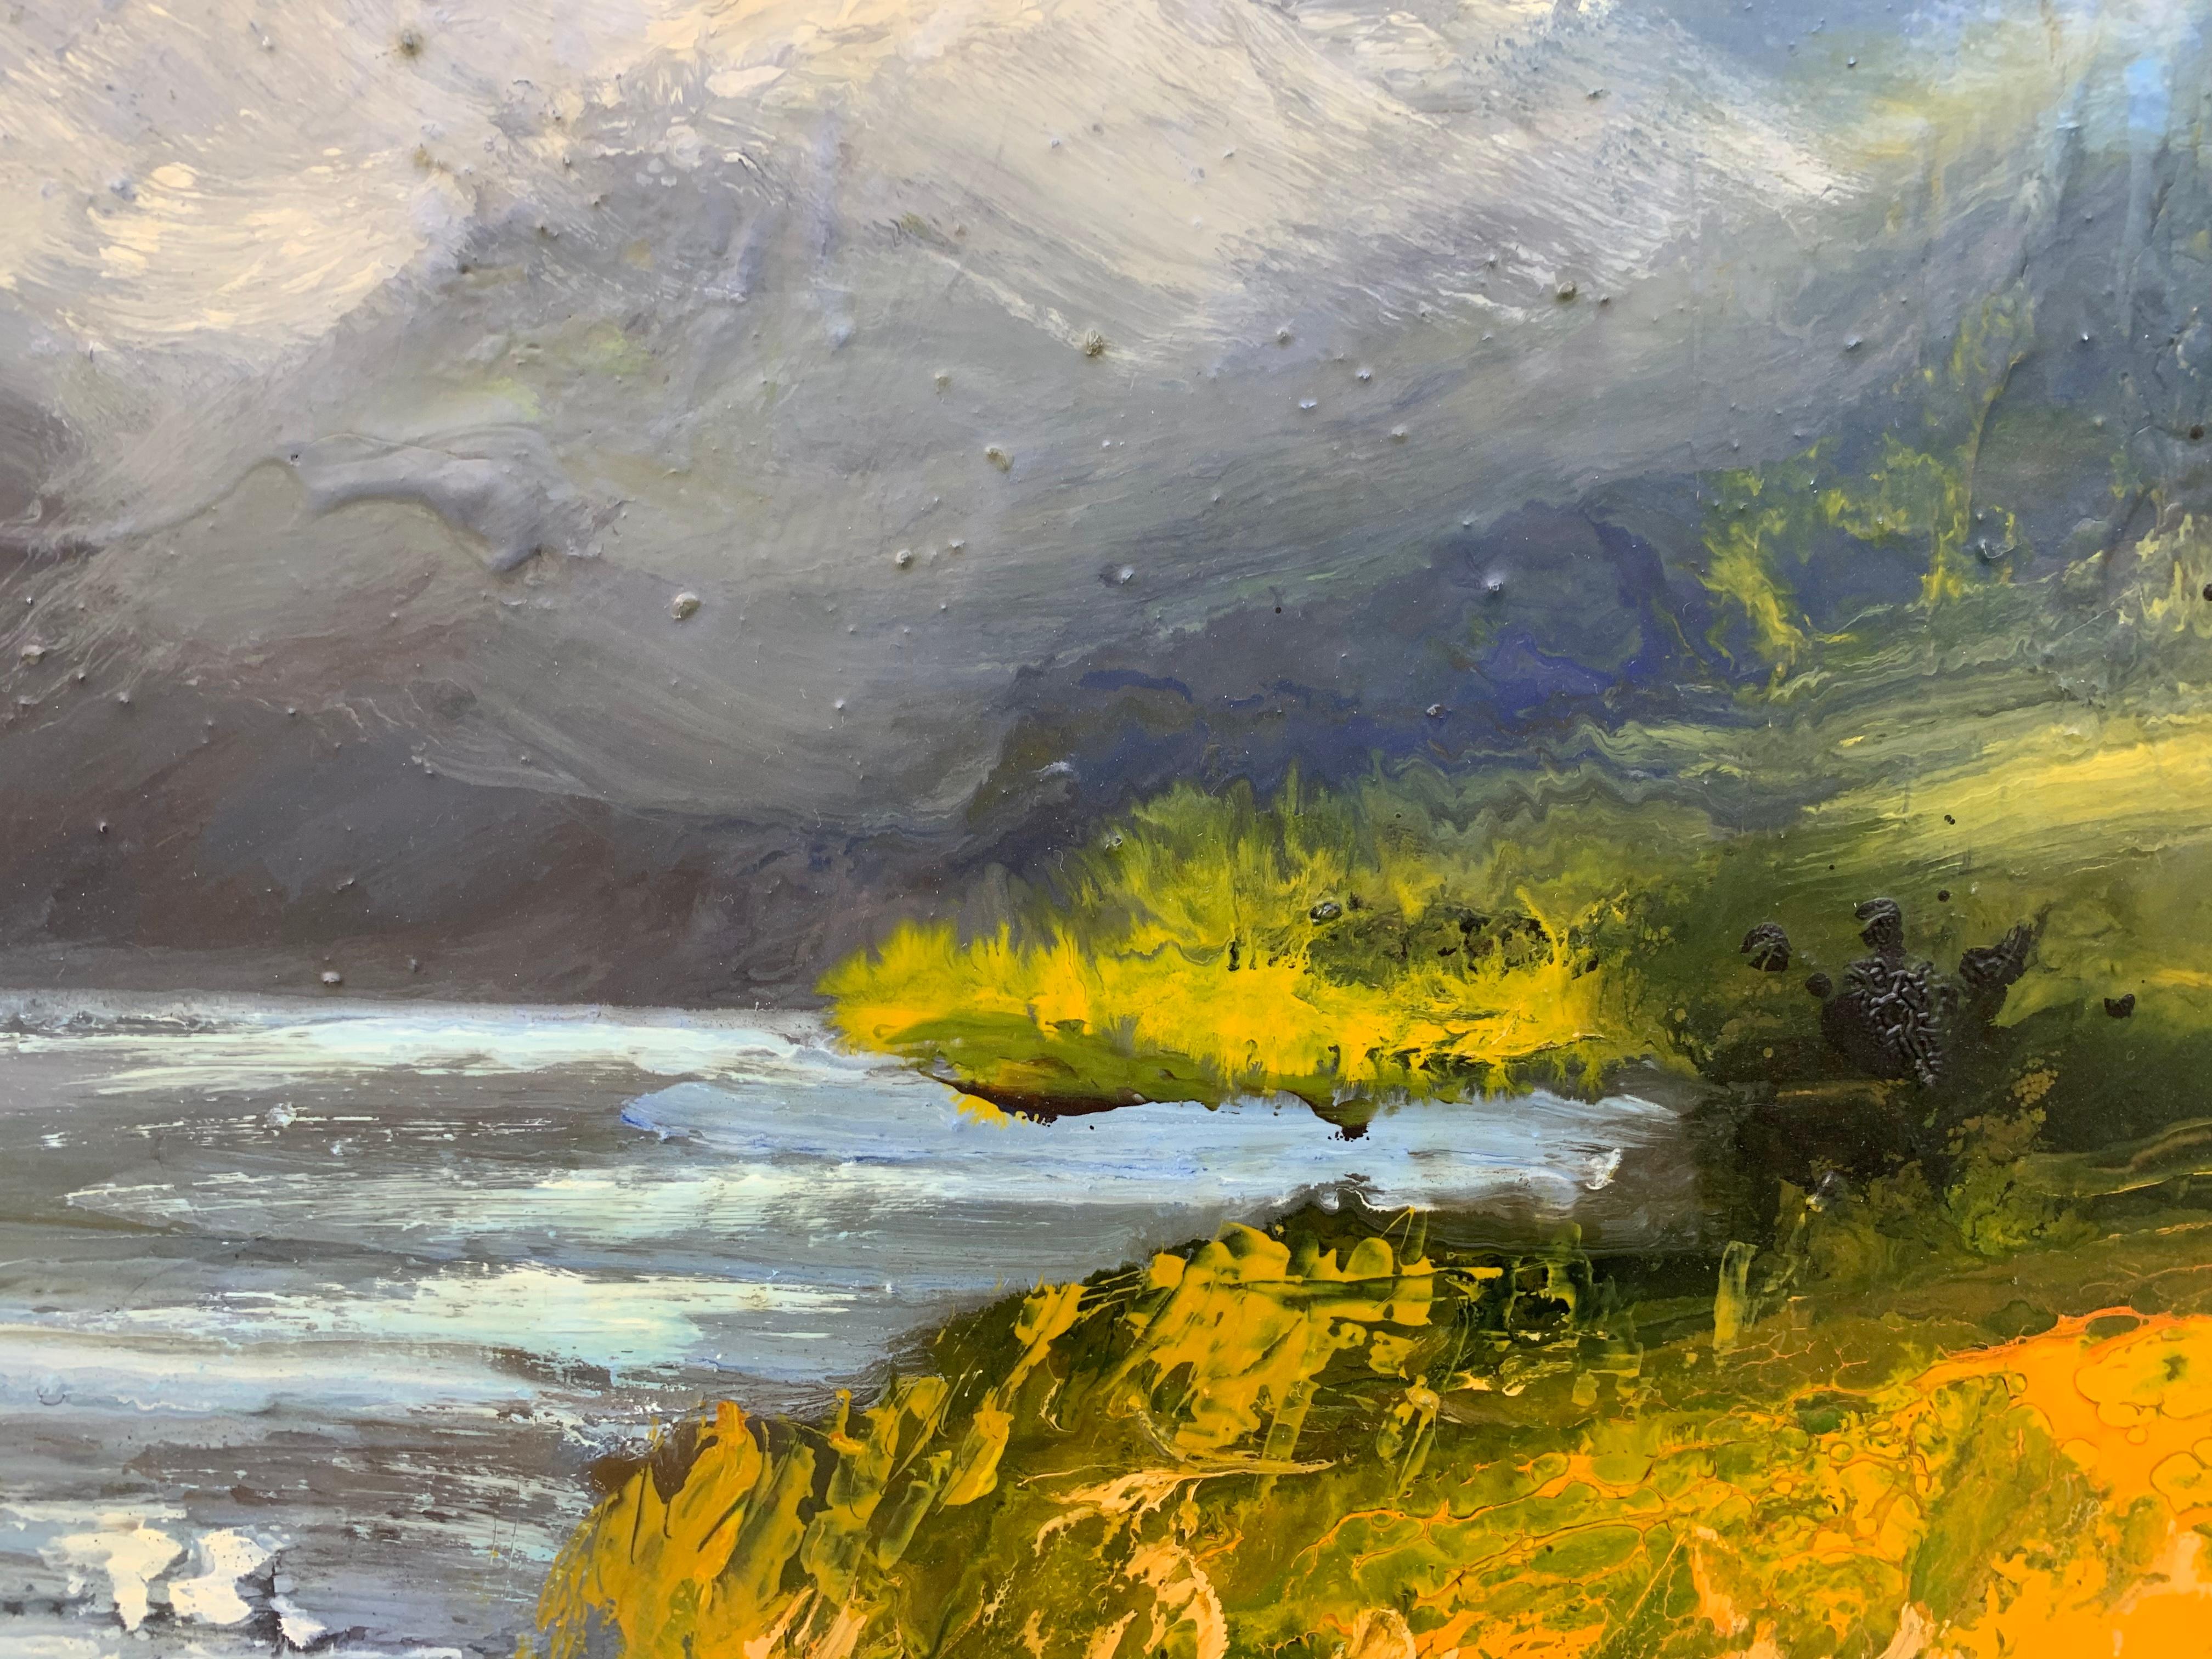 Impasto Oil Painting of Crummock Water in the English Lake District by British Landscape Artist Colin Halliday. This painting articulates the intensity of the clouds in Northern England, and the aesthetic beauty of the dramatic weather as it sweeps